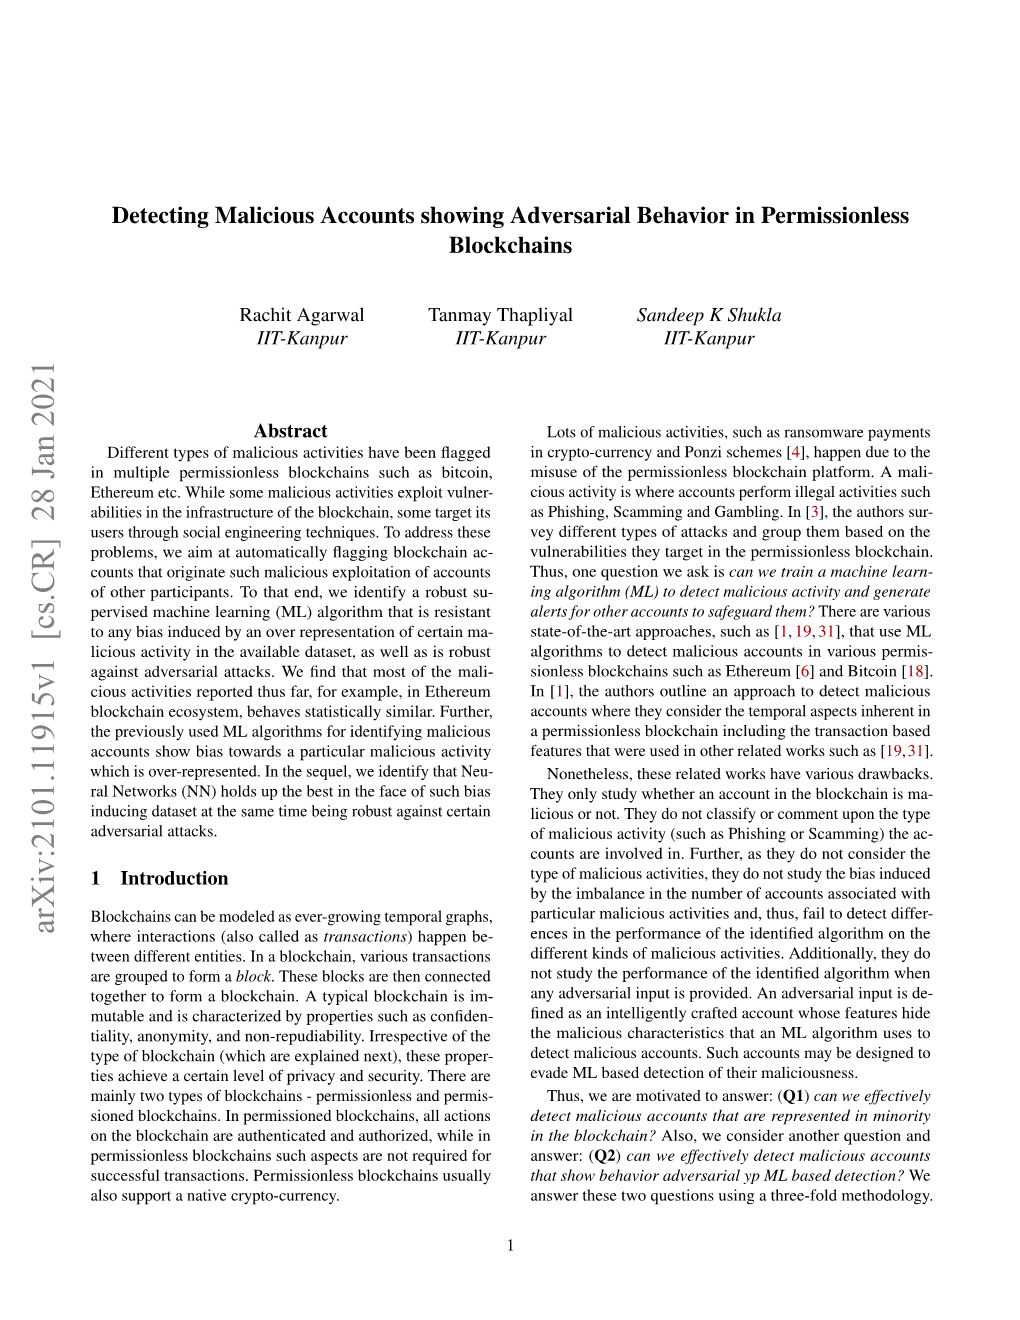 Detecting Malicious Accounts Showing Adversarial Behavior in Permissionless Blockchains